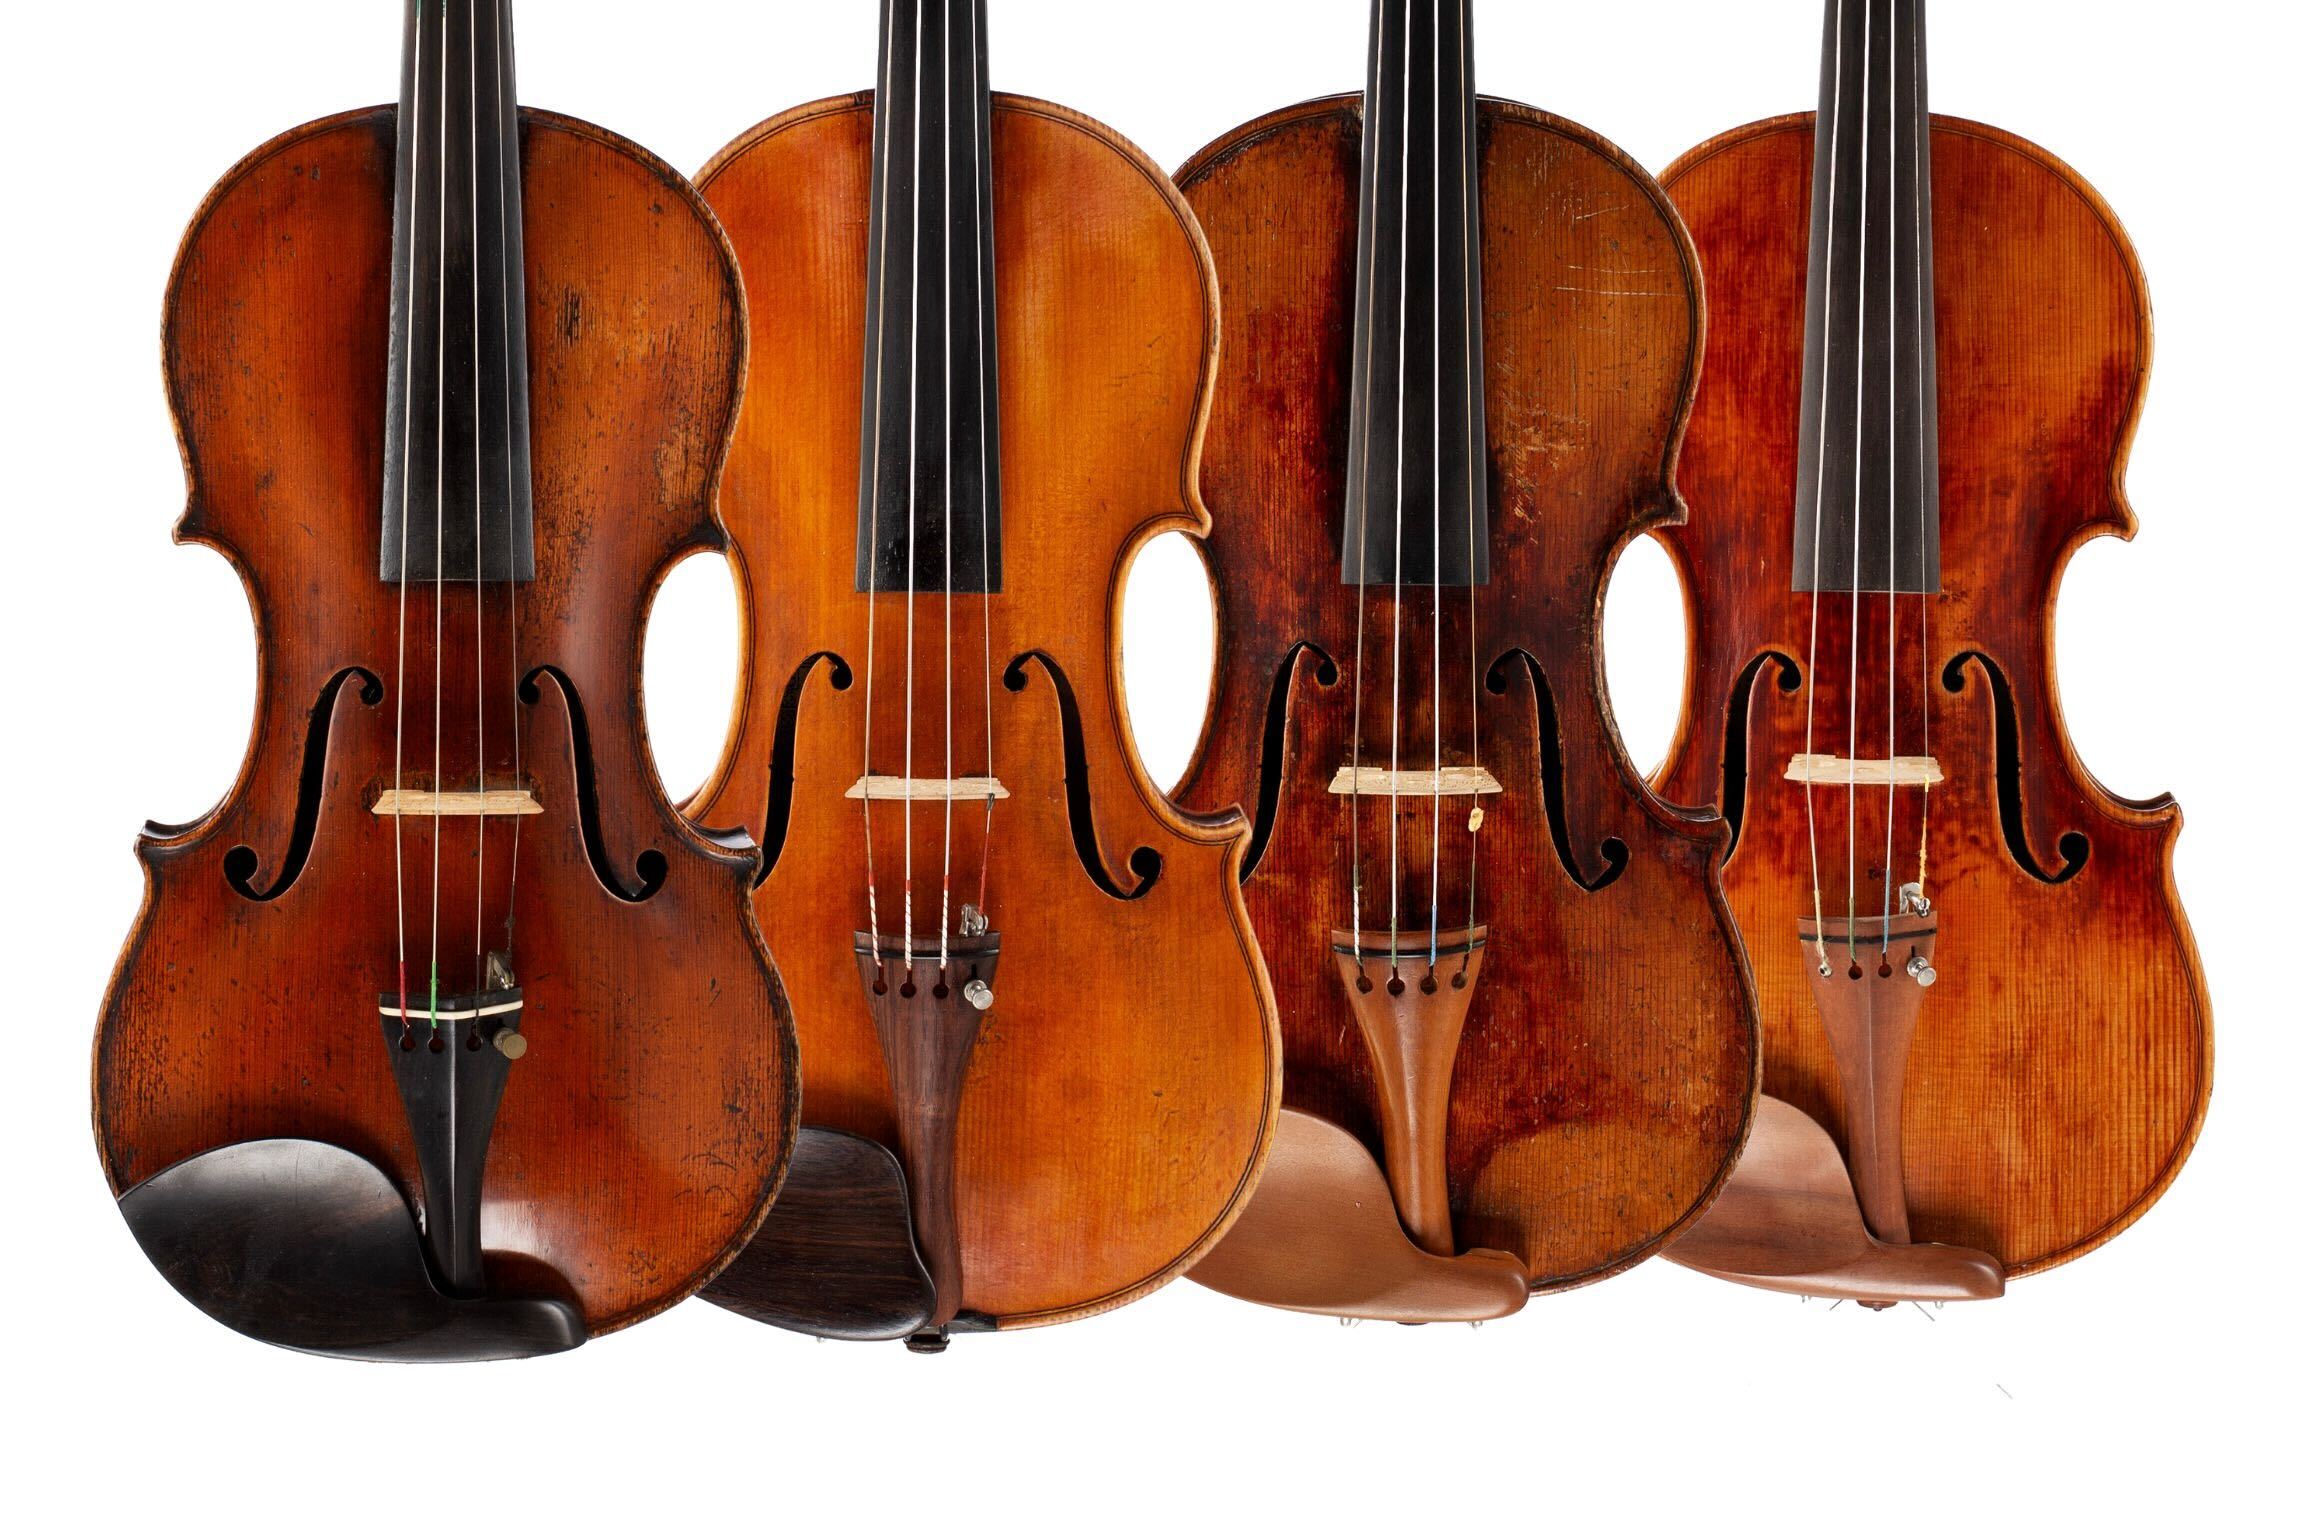 Four Decades of Instrument Collecting, Part III